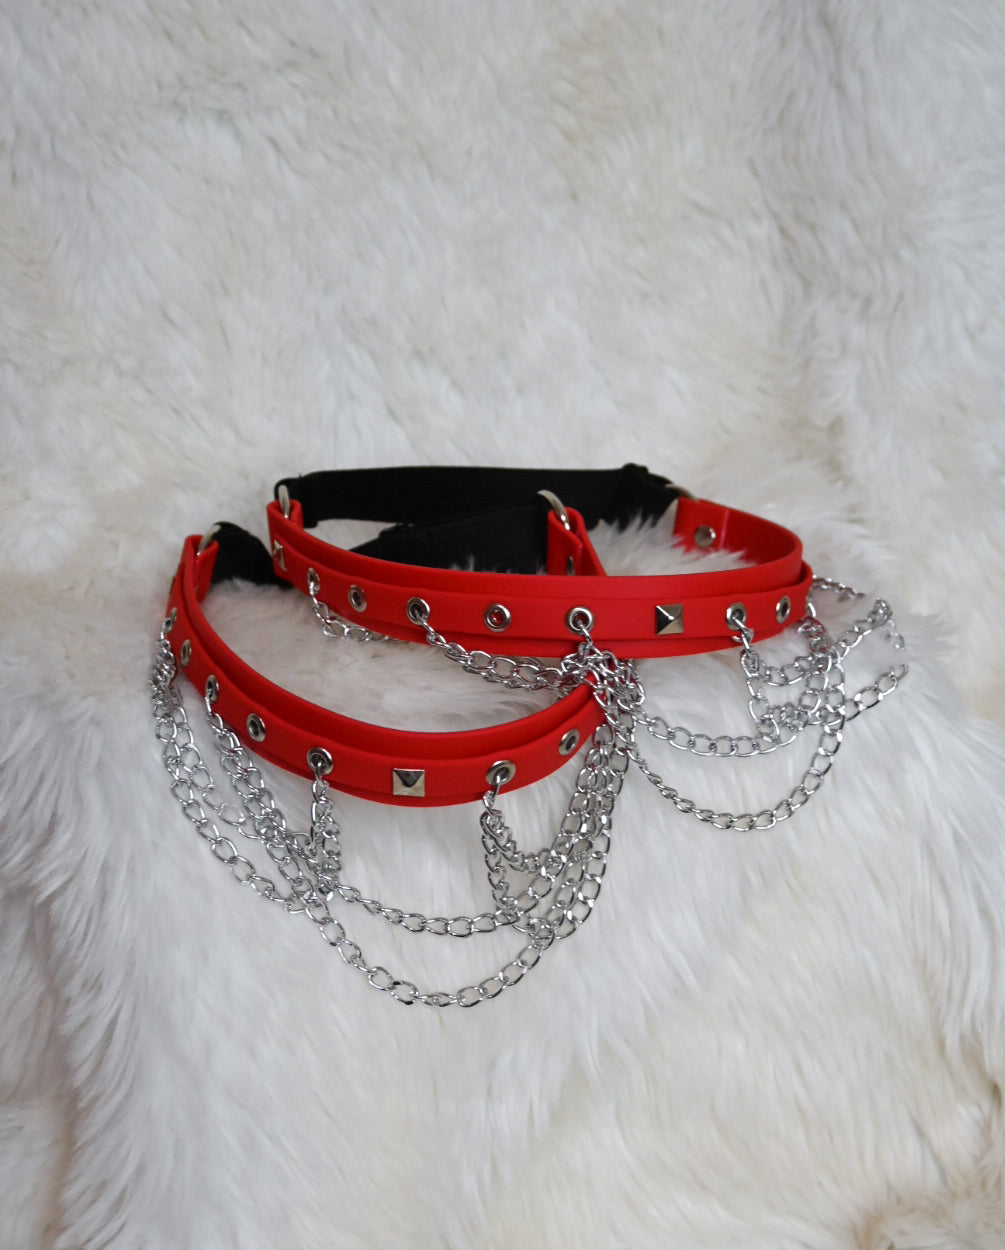 Jules faux or leather garter